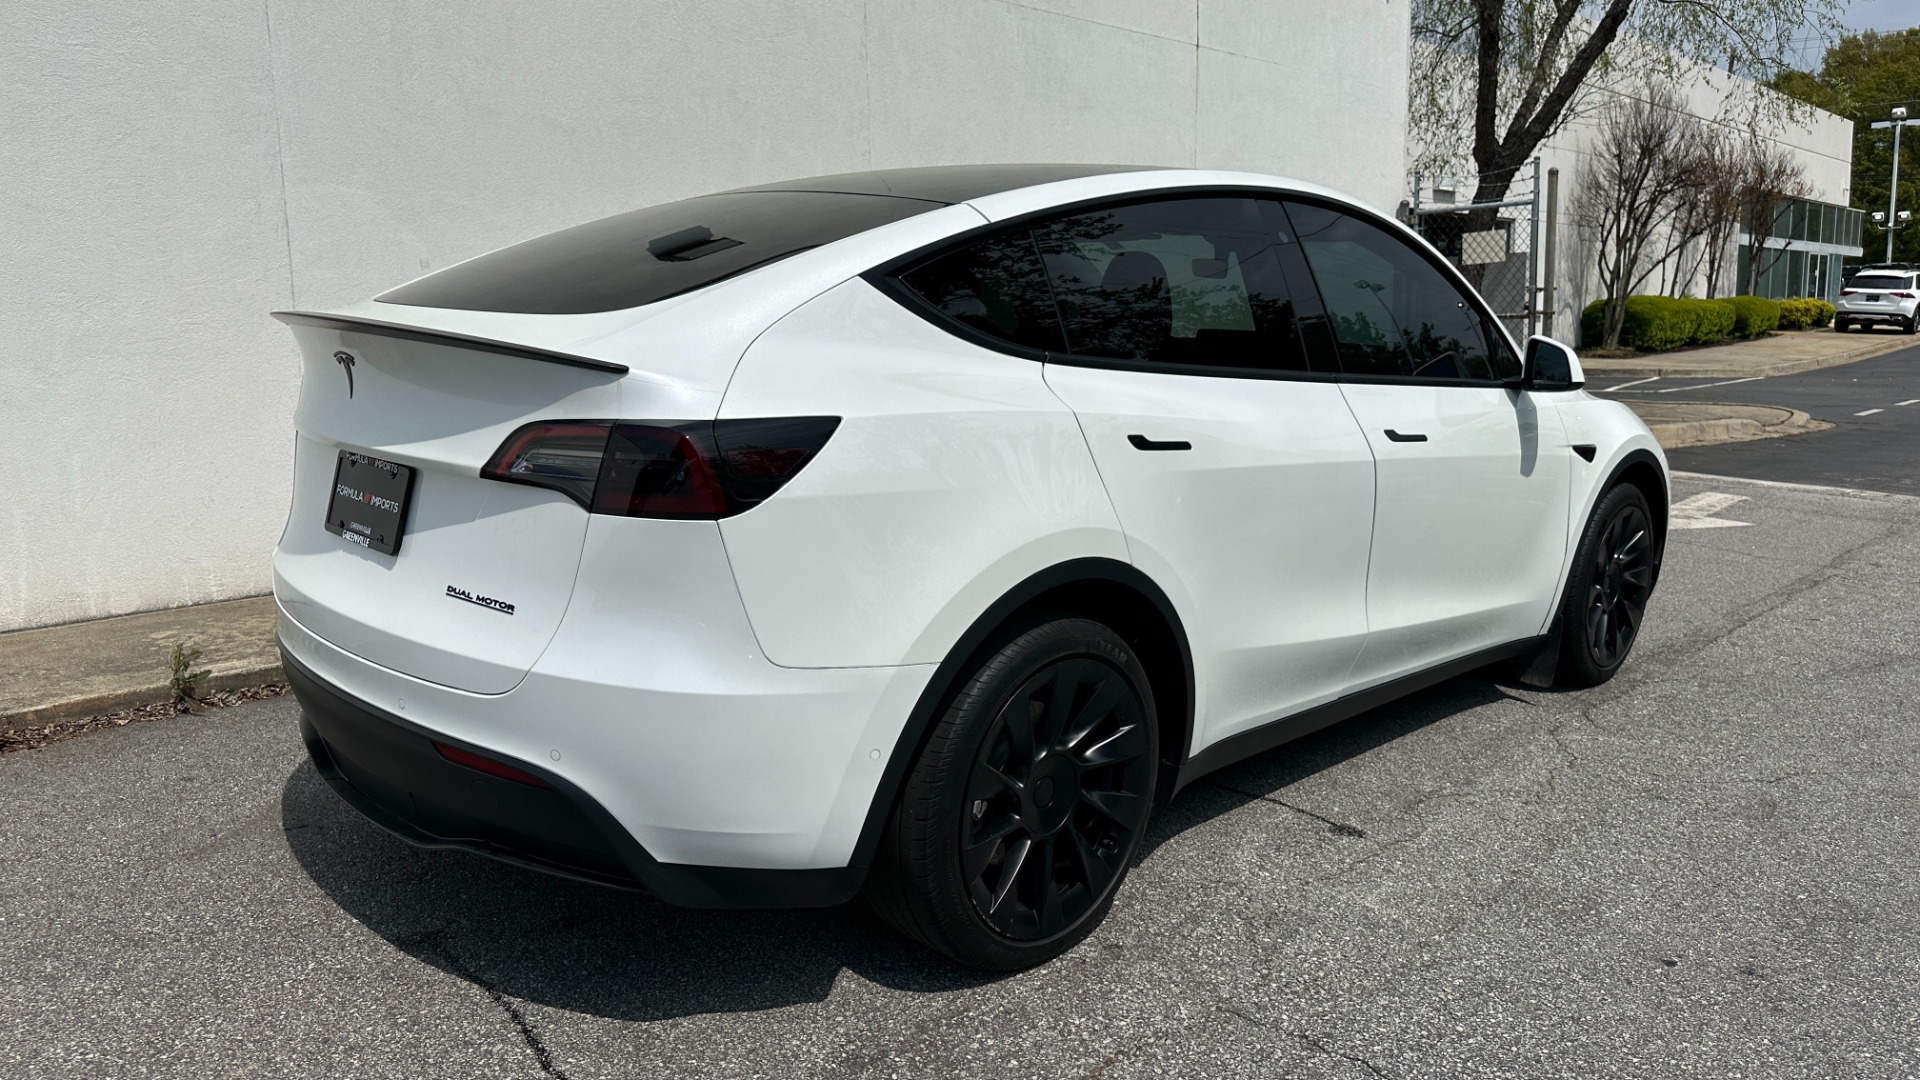 Used 2020 Tesla MODEL Y LONG RANGE ACCELERATION BOOST / AUTOPILOT / STANDARD CONNECTIVITY / WOOD TRIM for sale $44,495 at Formula Imports in Charlotte NC 28227 6